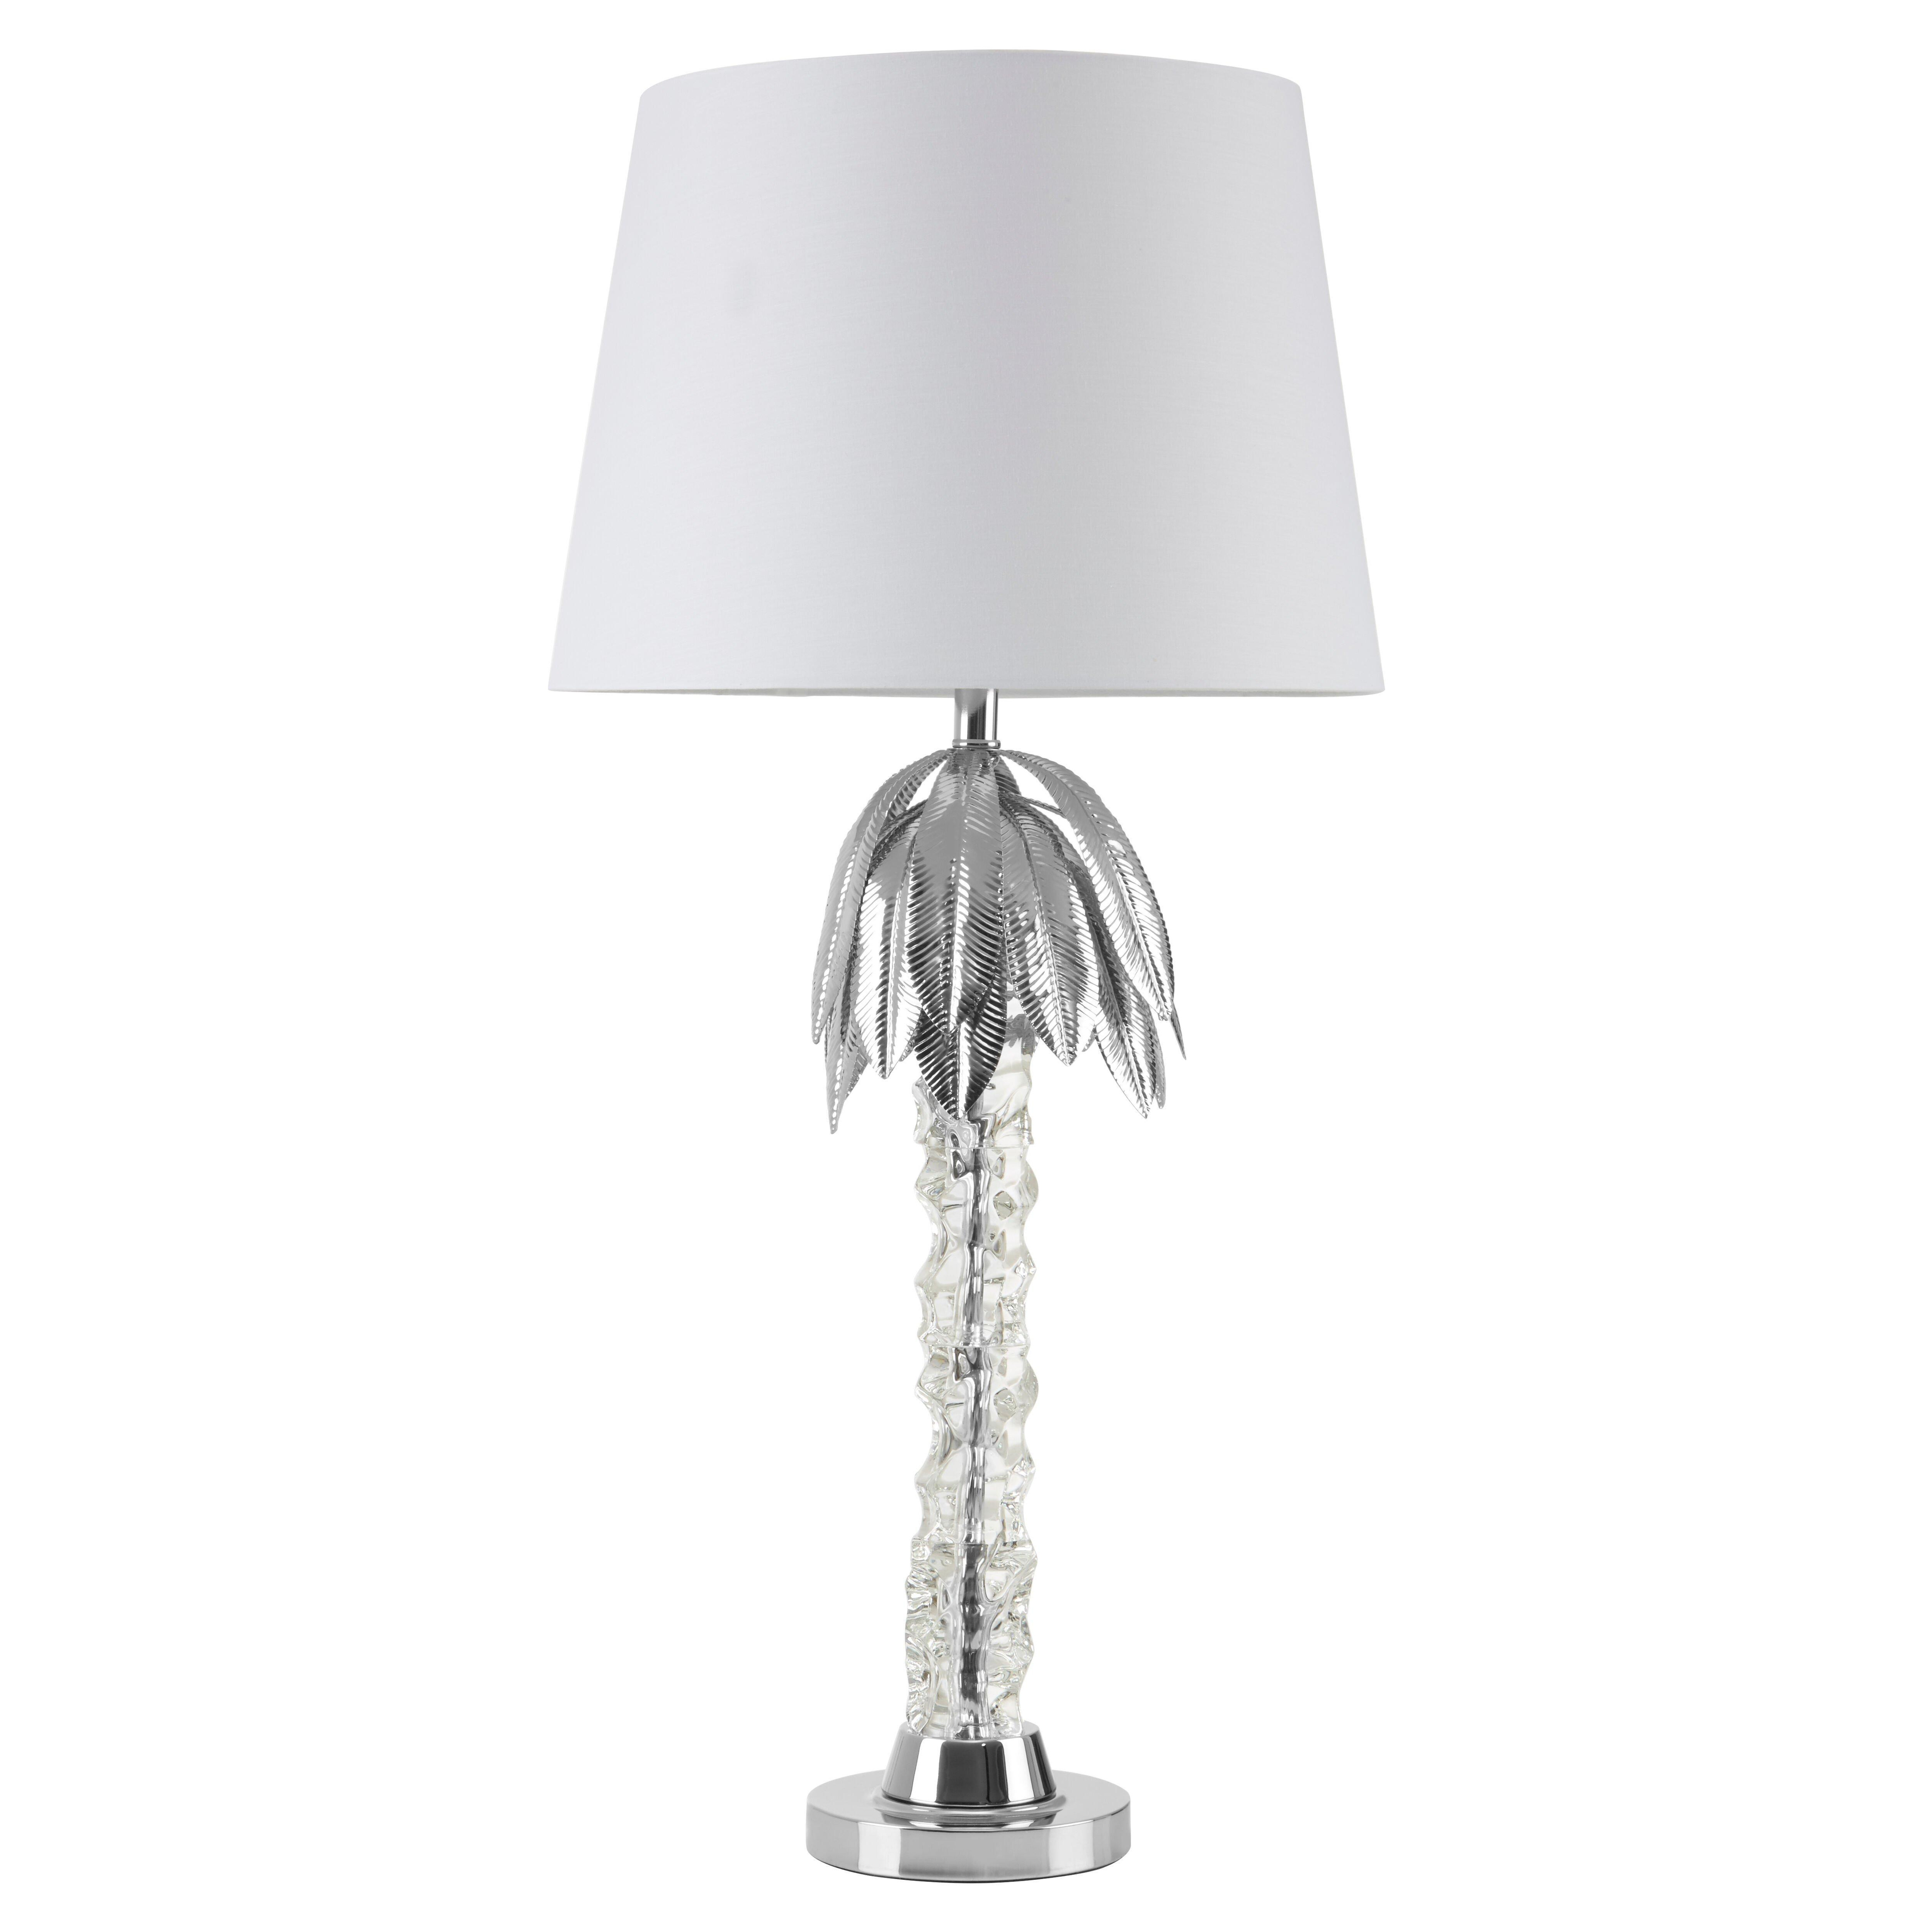 Interiors by Premier Halm Table Lamp - image 1